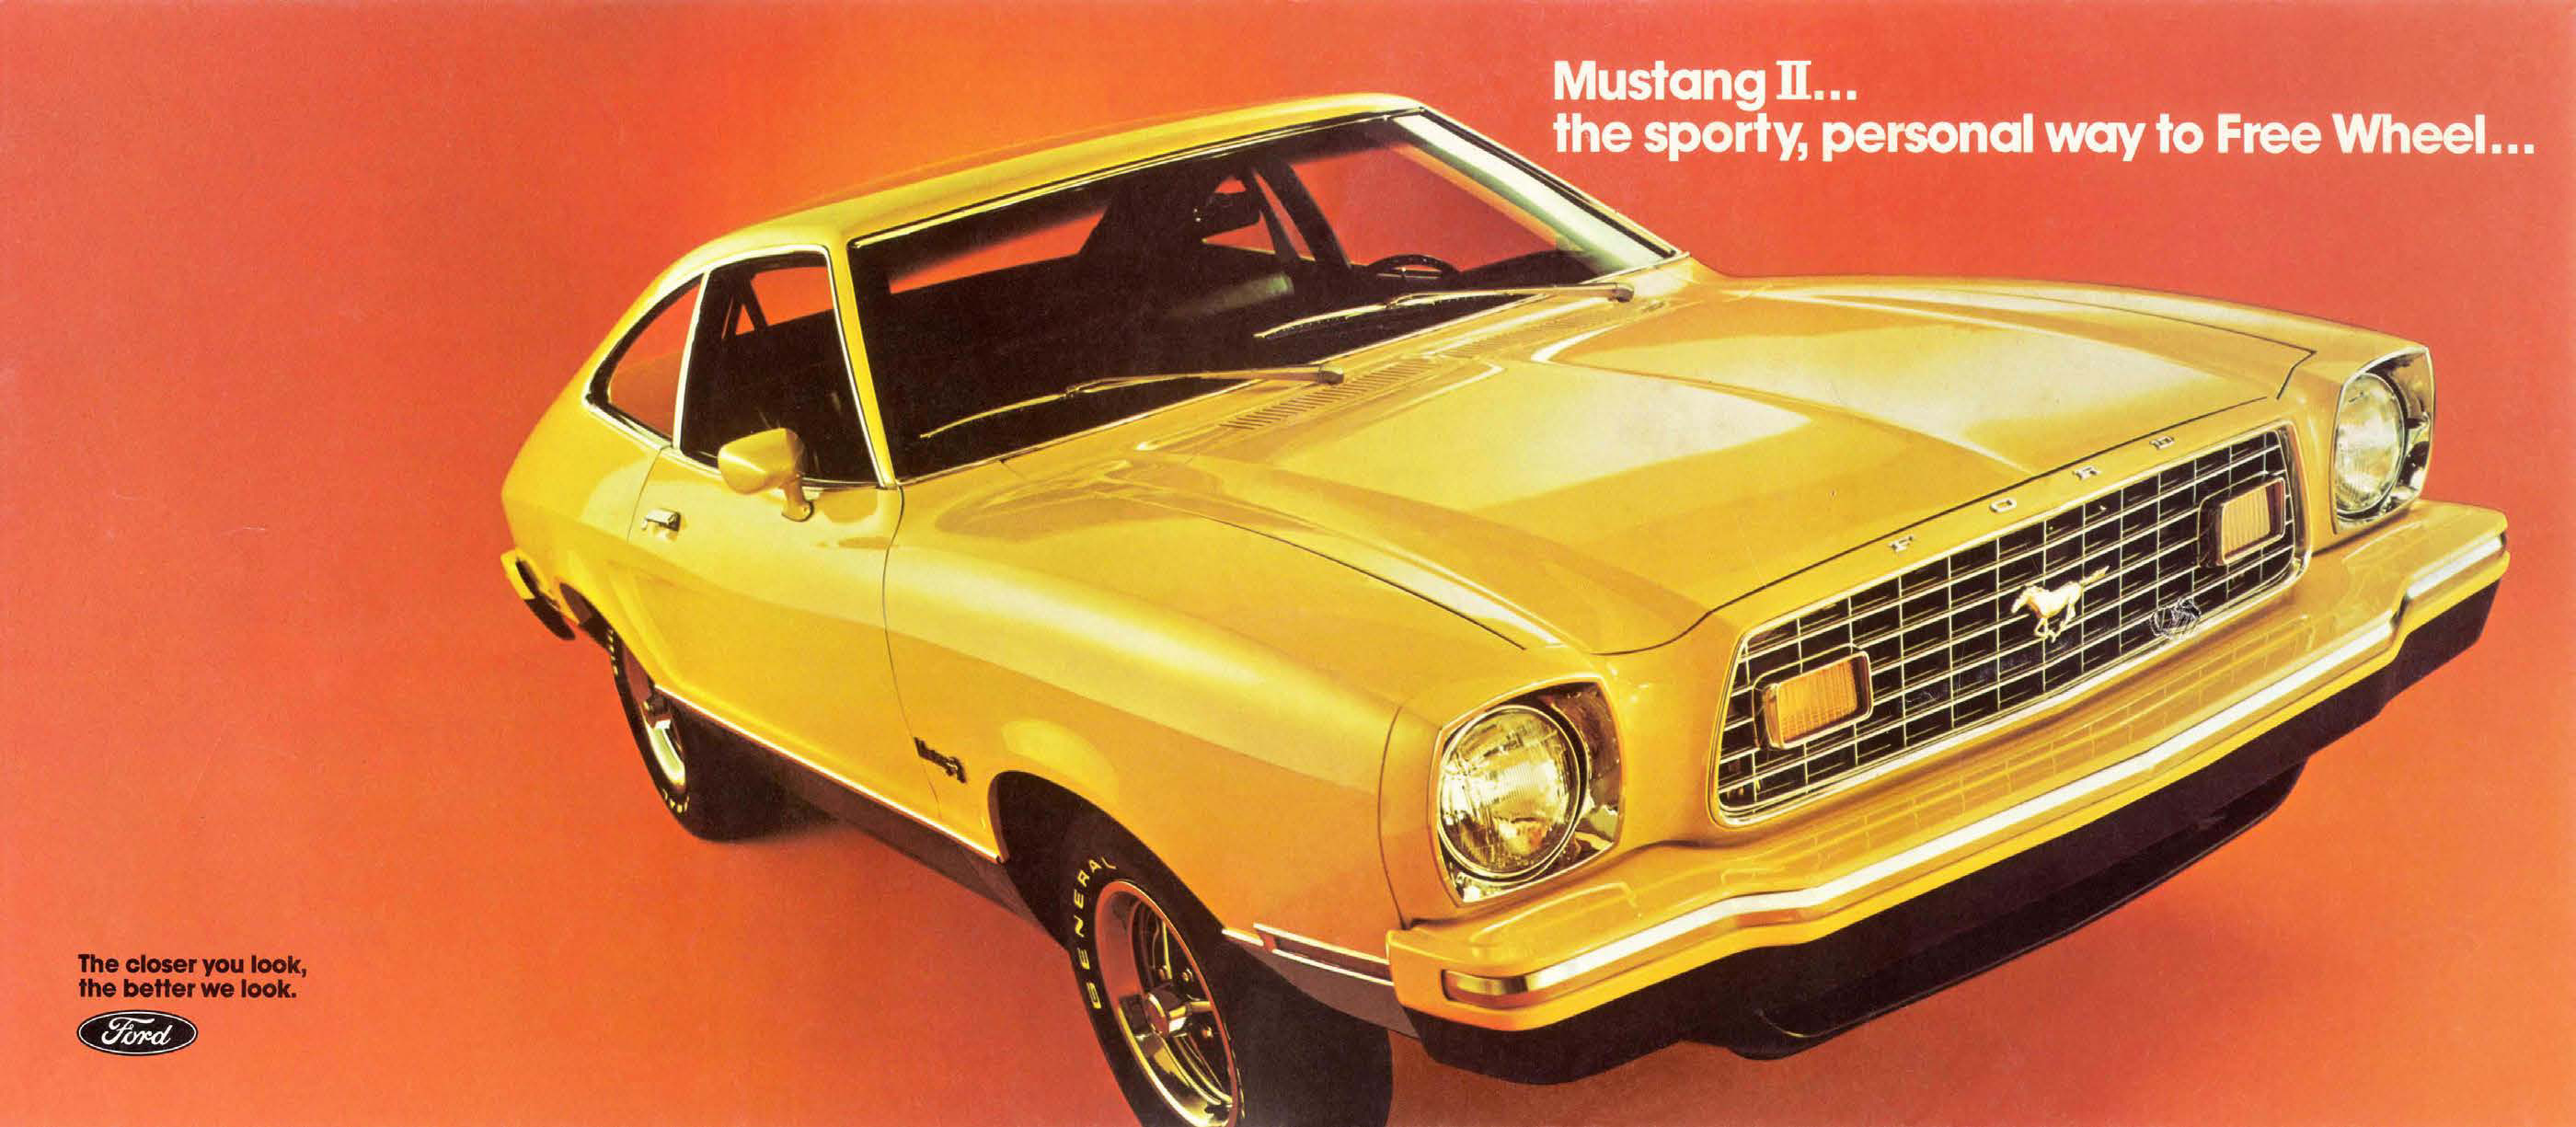 1976_Ford_Mustang_Free_Wheel-08-01